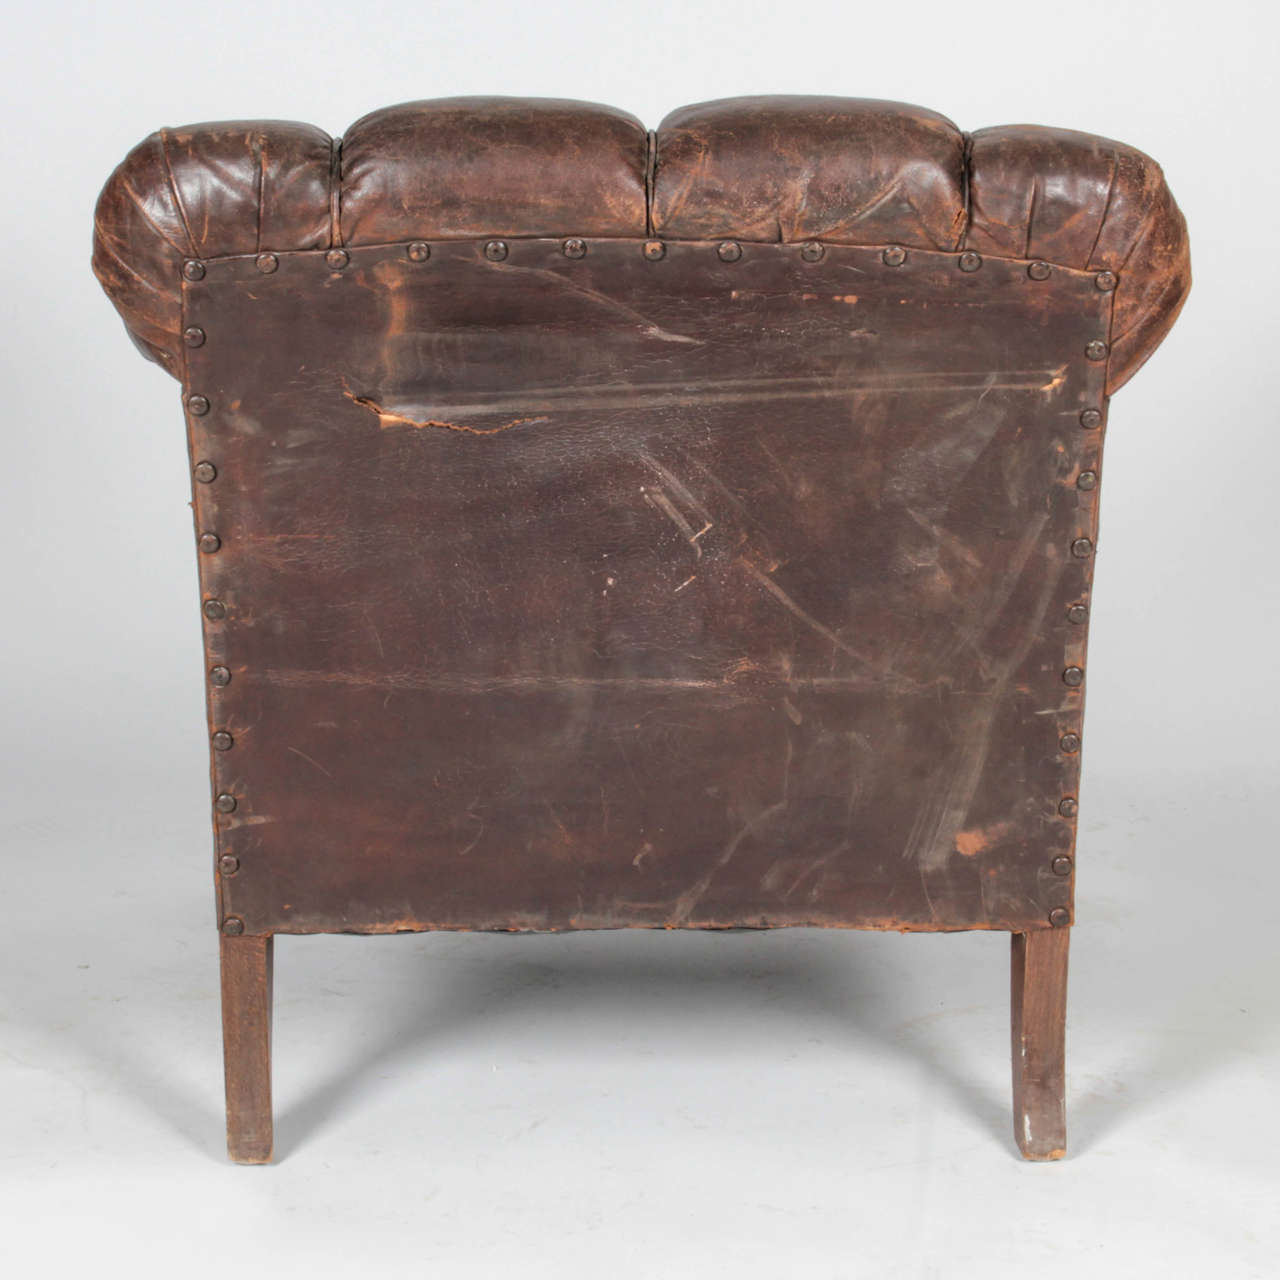 Unknown 20th Century, Distressed Vertical-Tufted Leather Club Chair For Sale